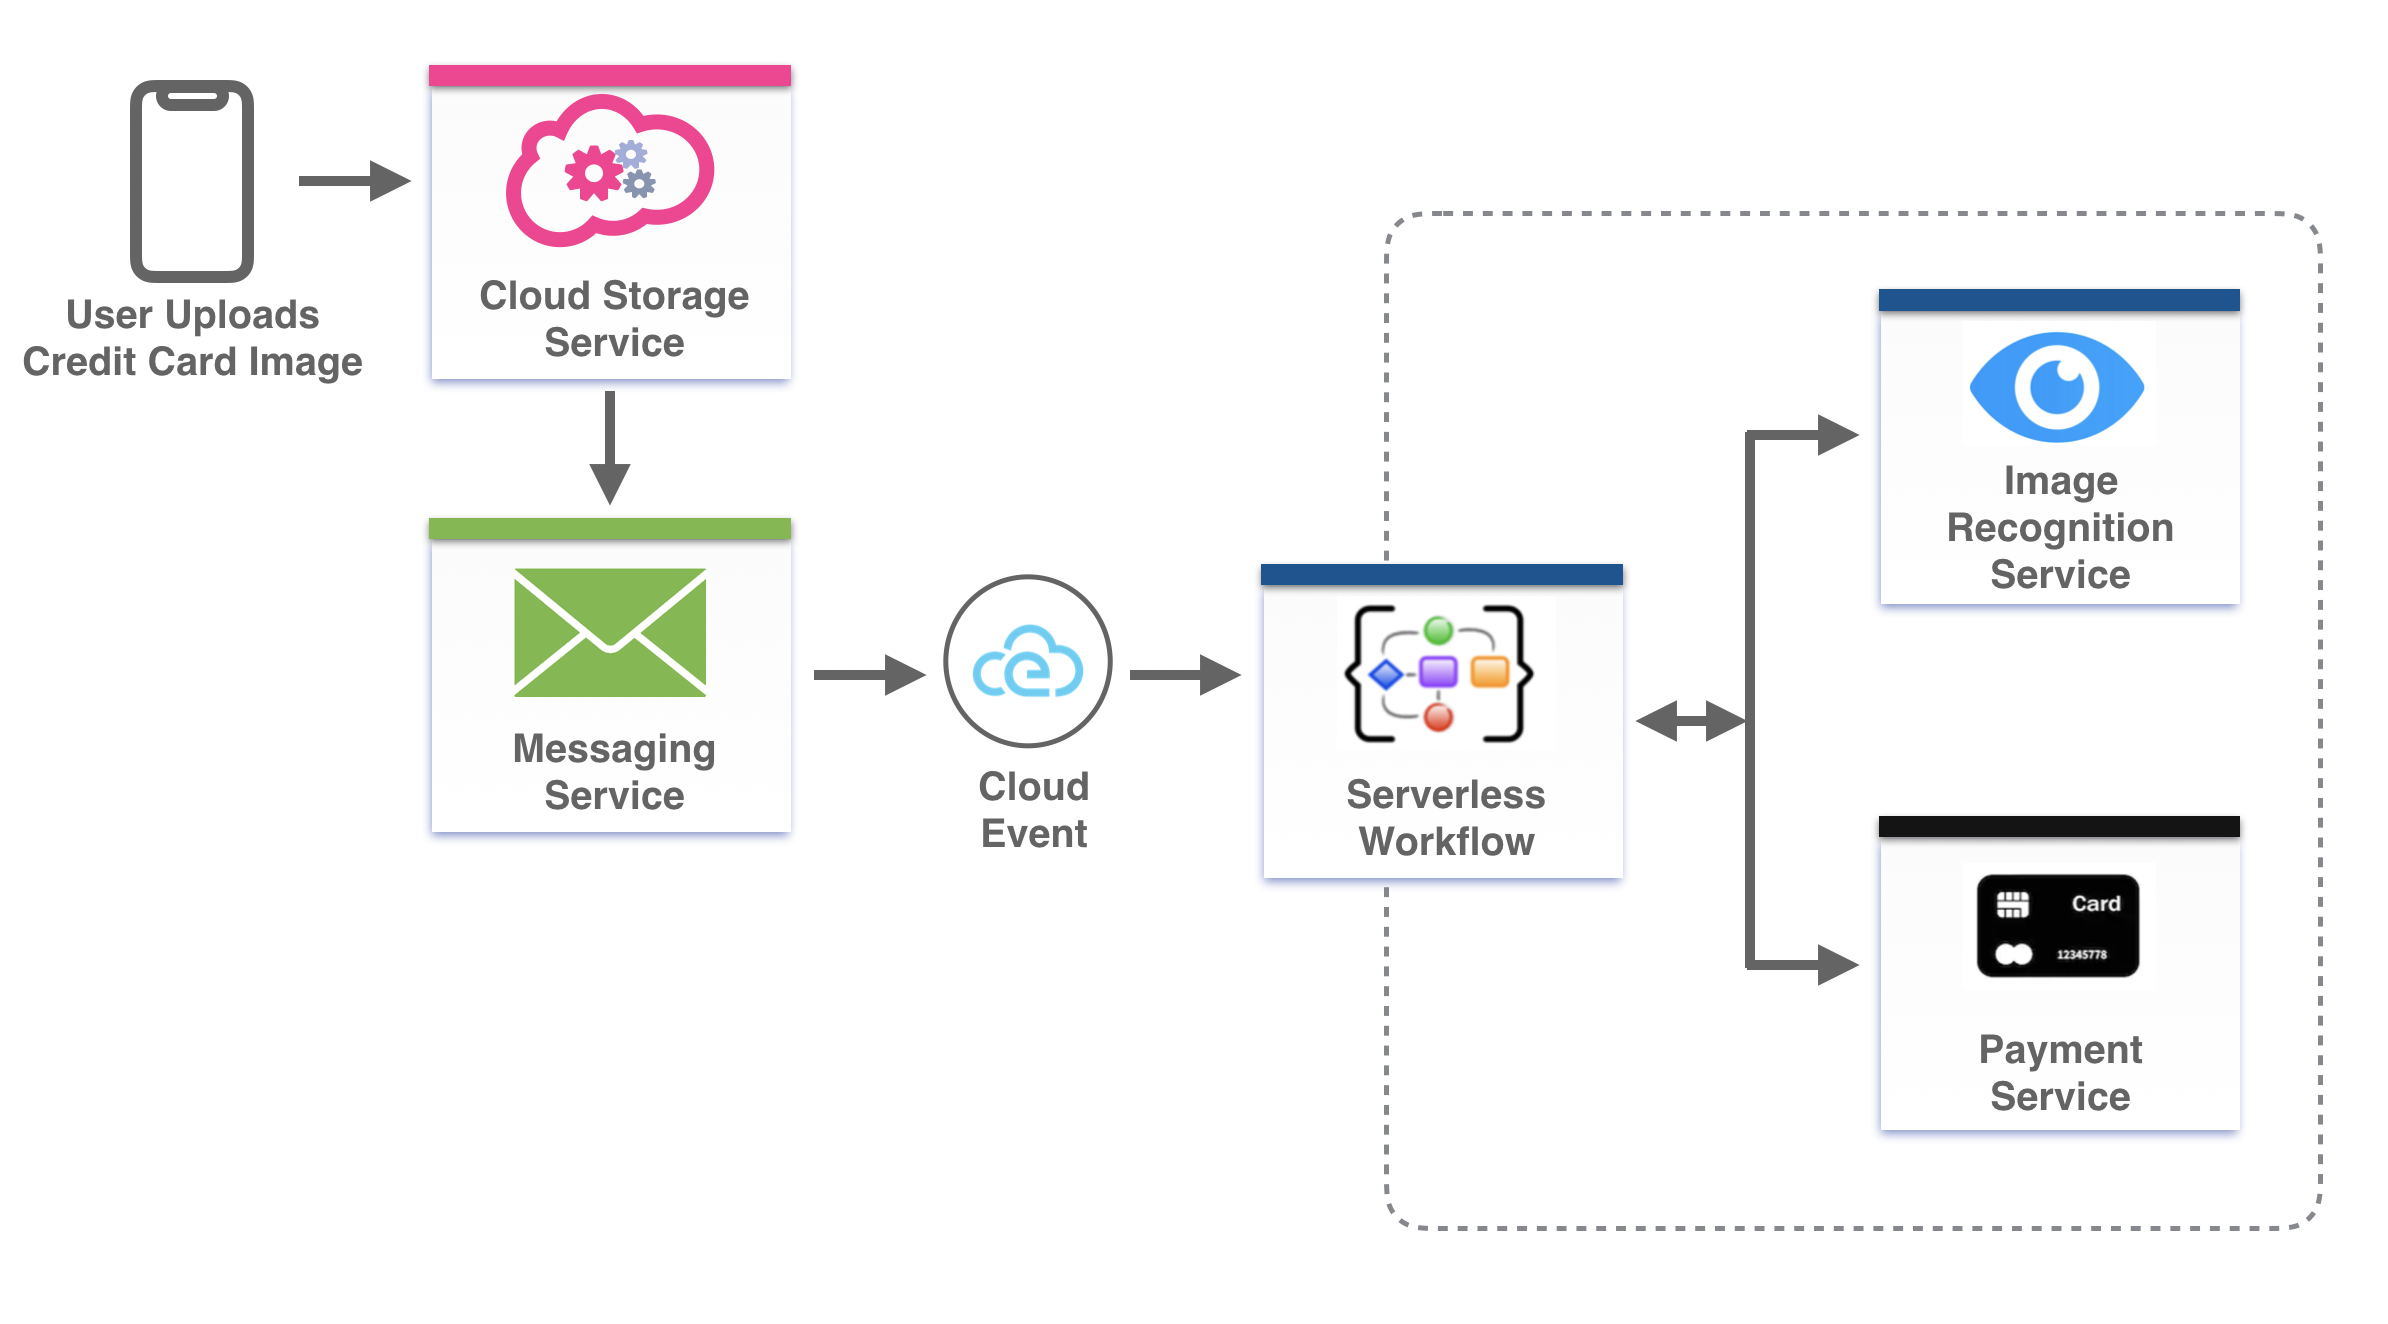 Image of Serverless Workflow orchestration for payment processing